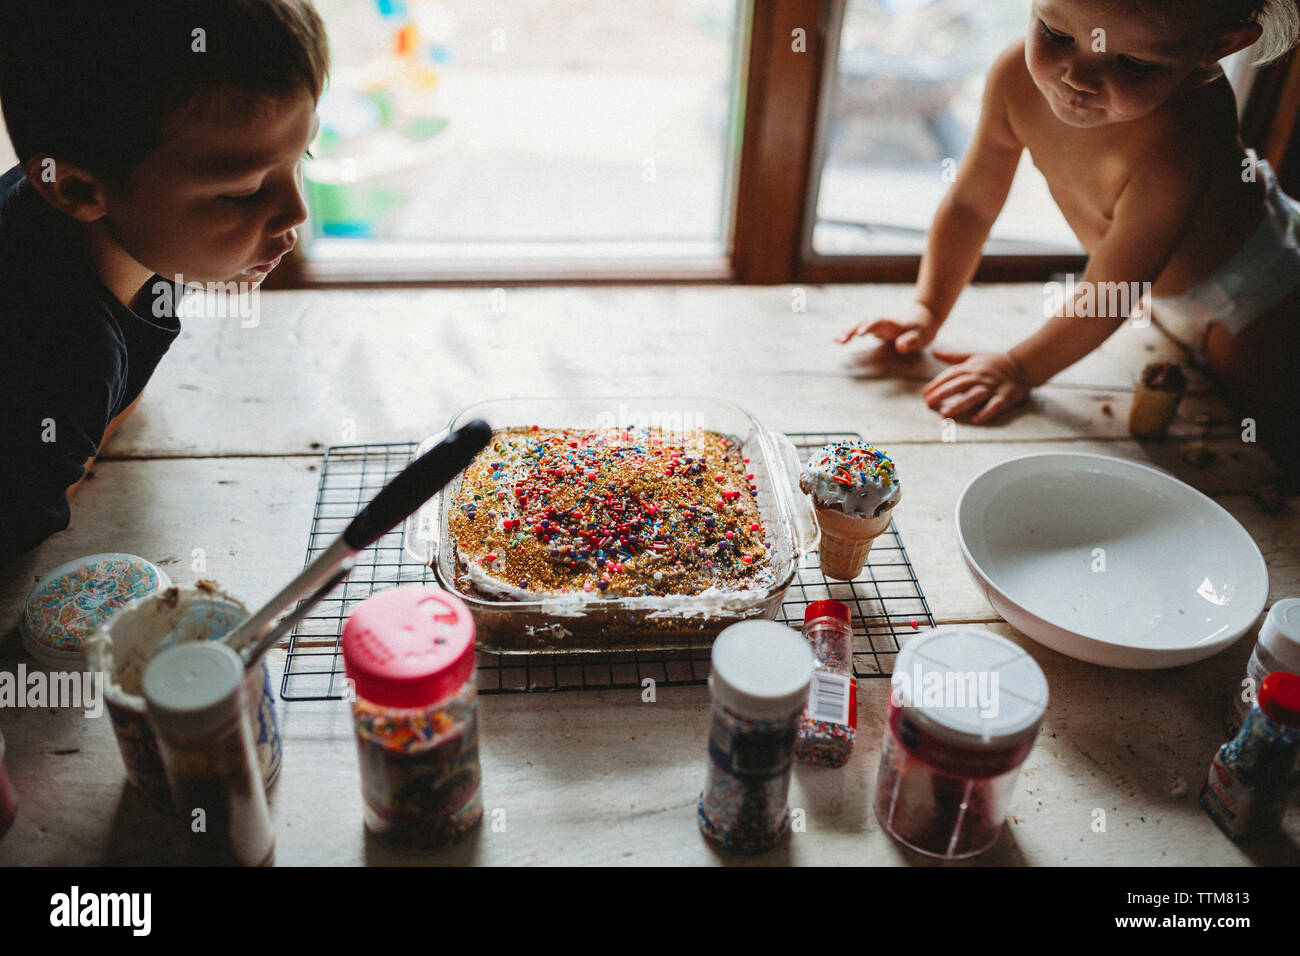 Two siblings looking at freshly baked heavily decorated sprinkled cake Stock Photo